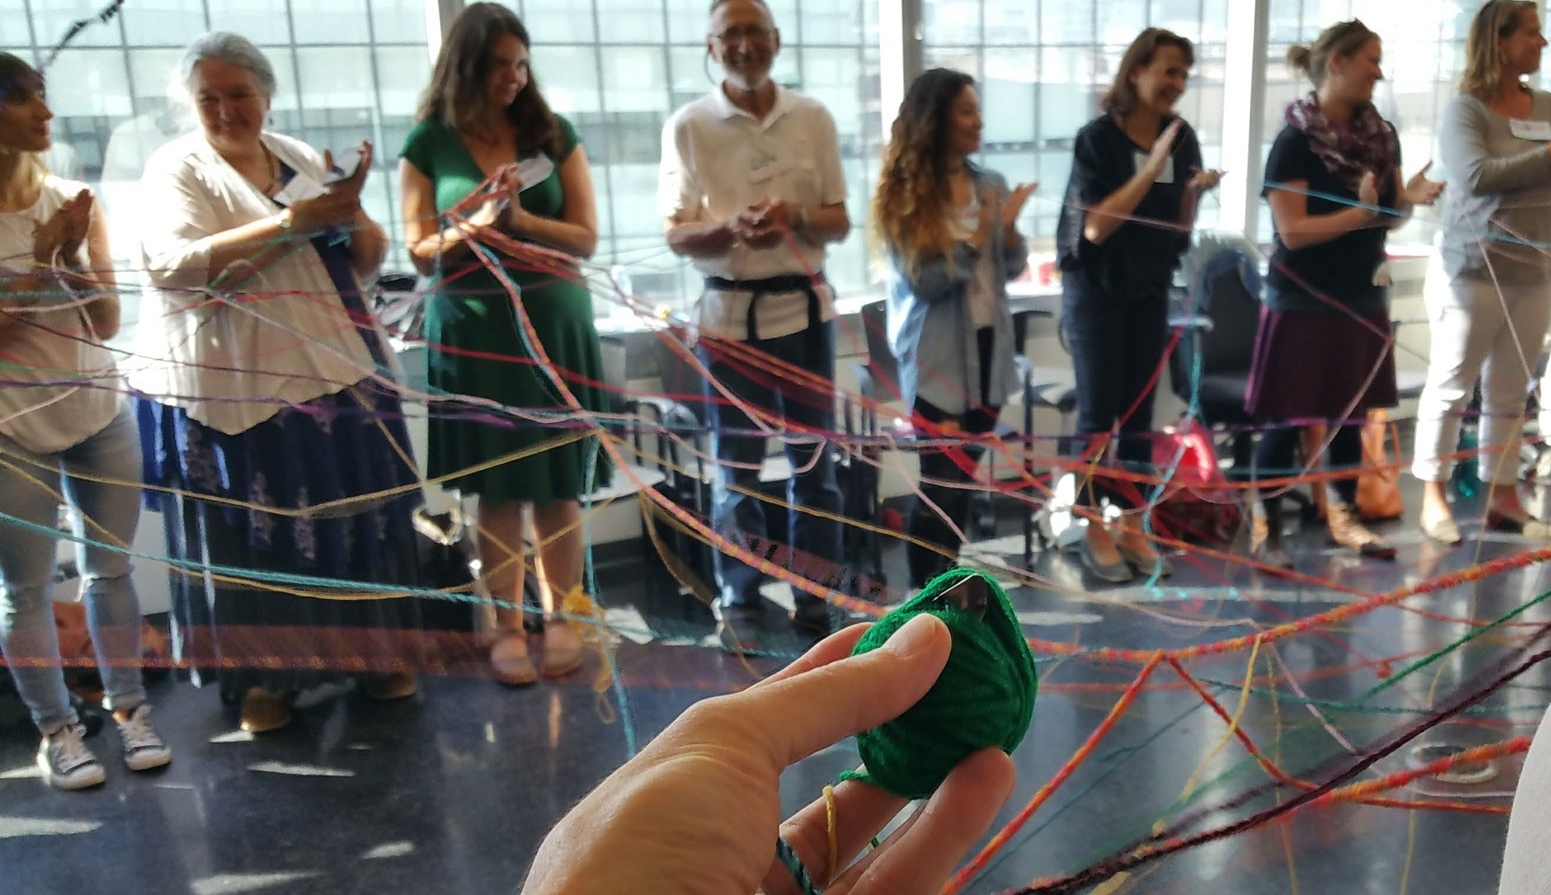 image features a group of people interconnected through an activity with playdoh and yarn